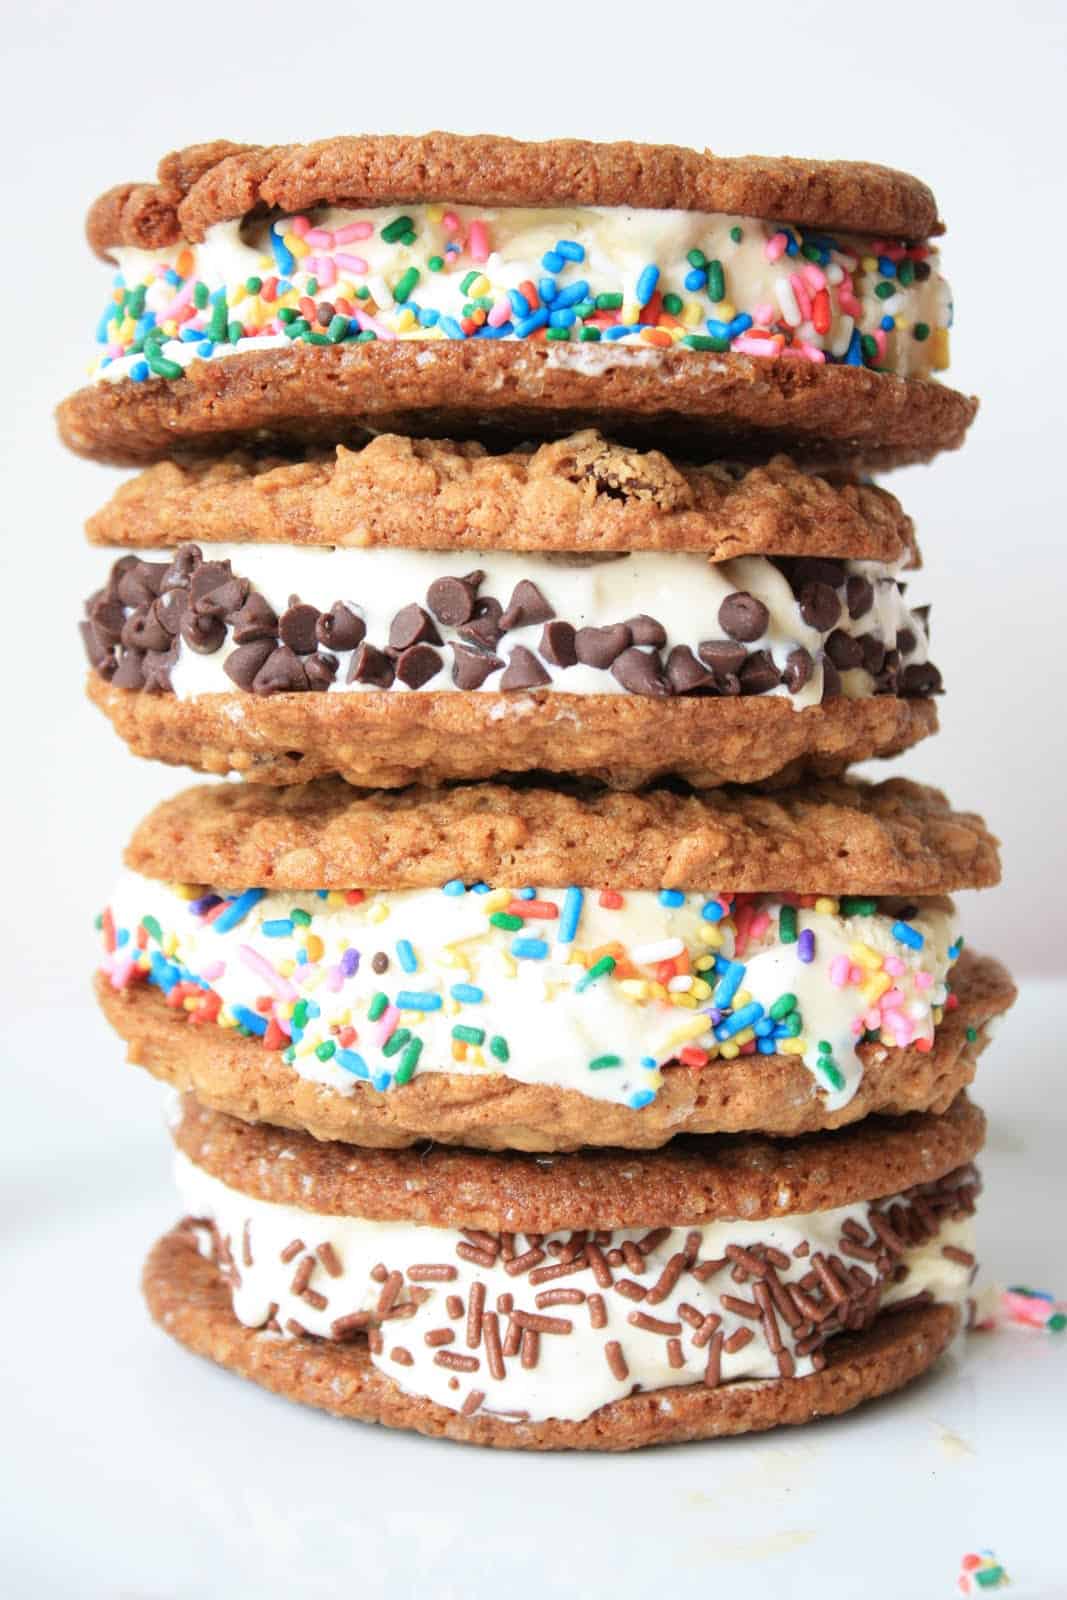 Oatmeal cookie and sprinkles sandwiches